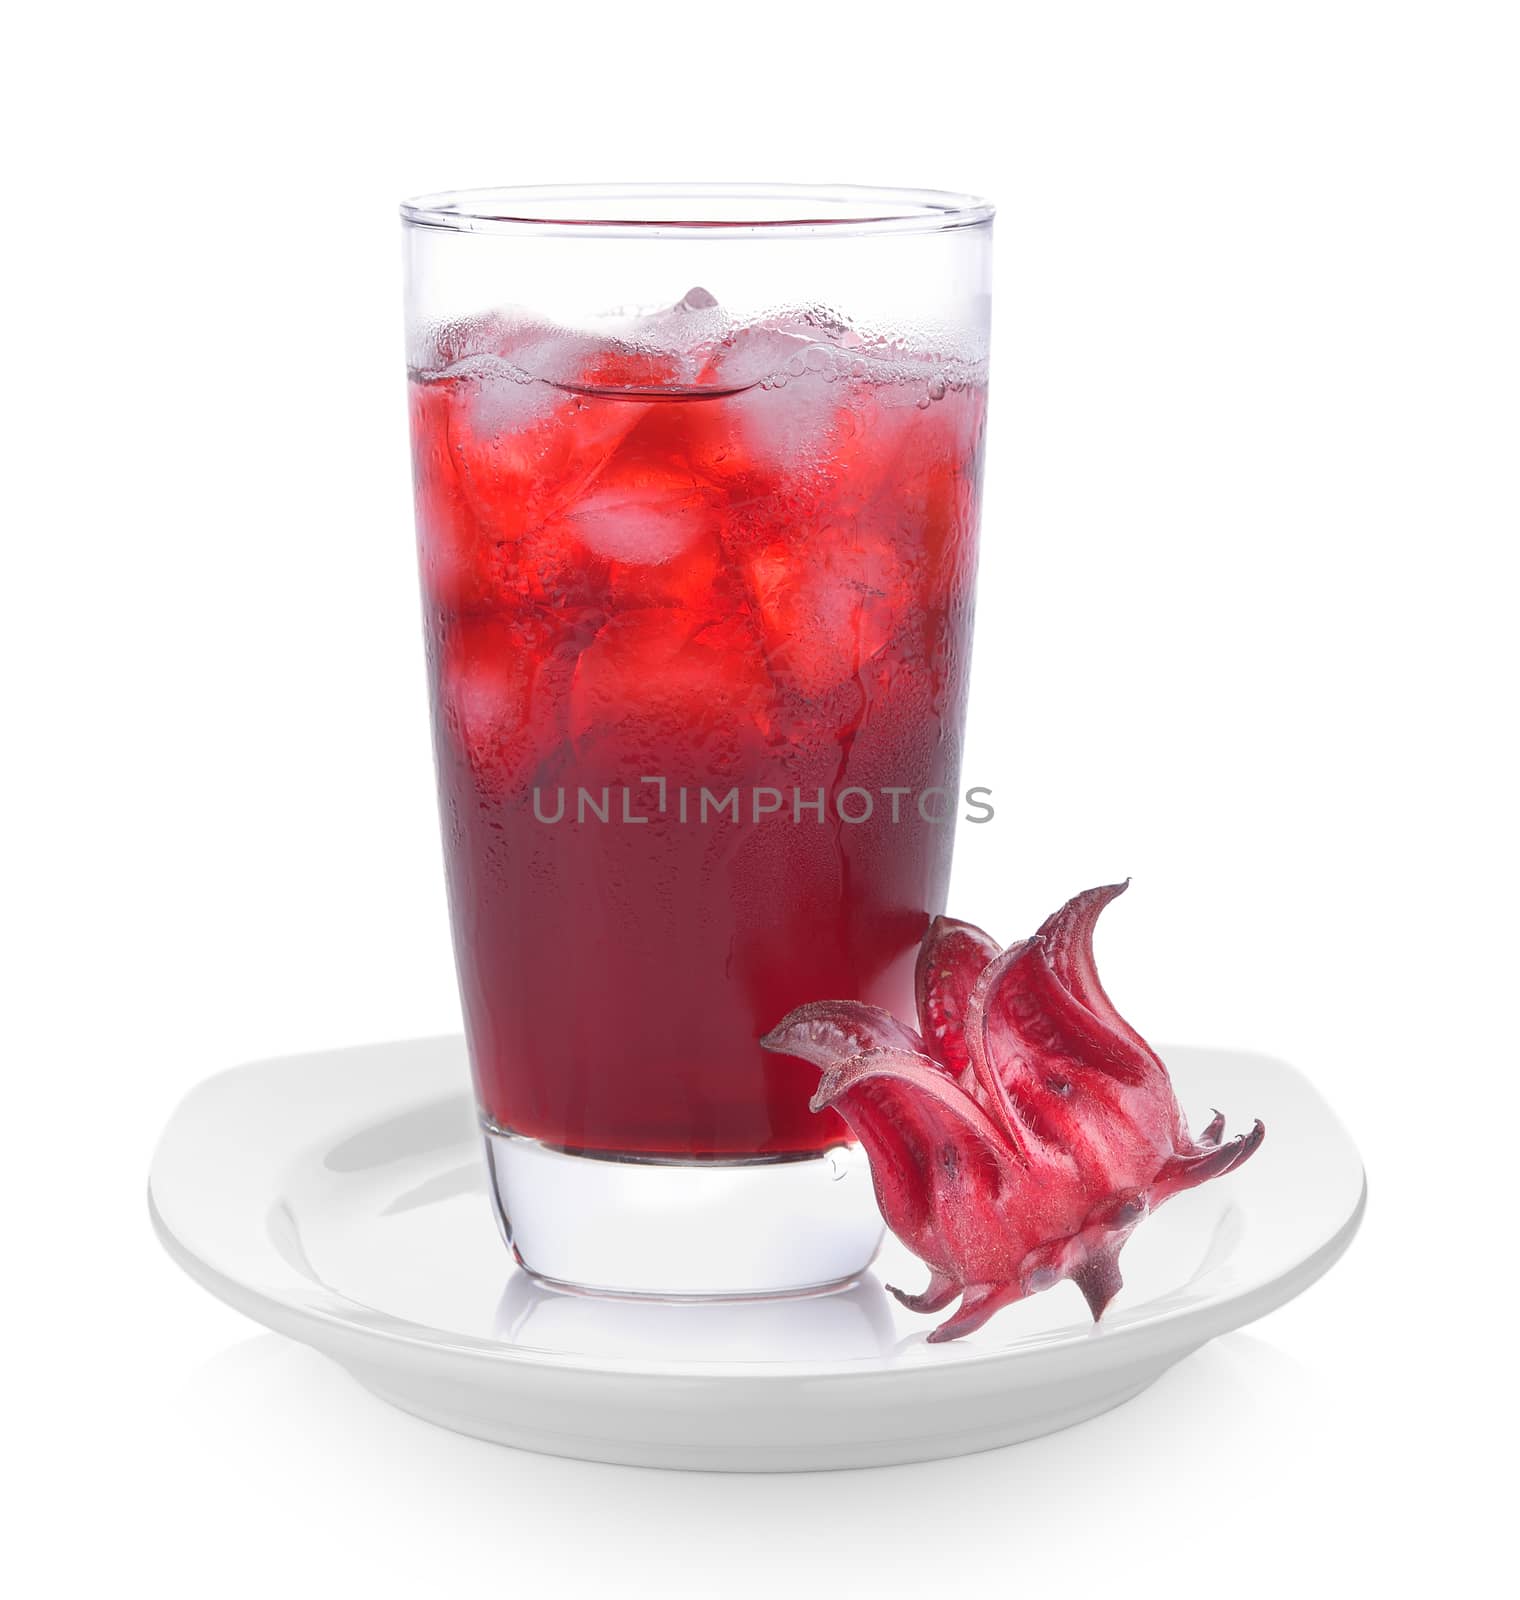 roselle flower juice in glass with ice isolated on white background